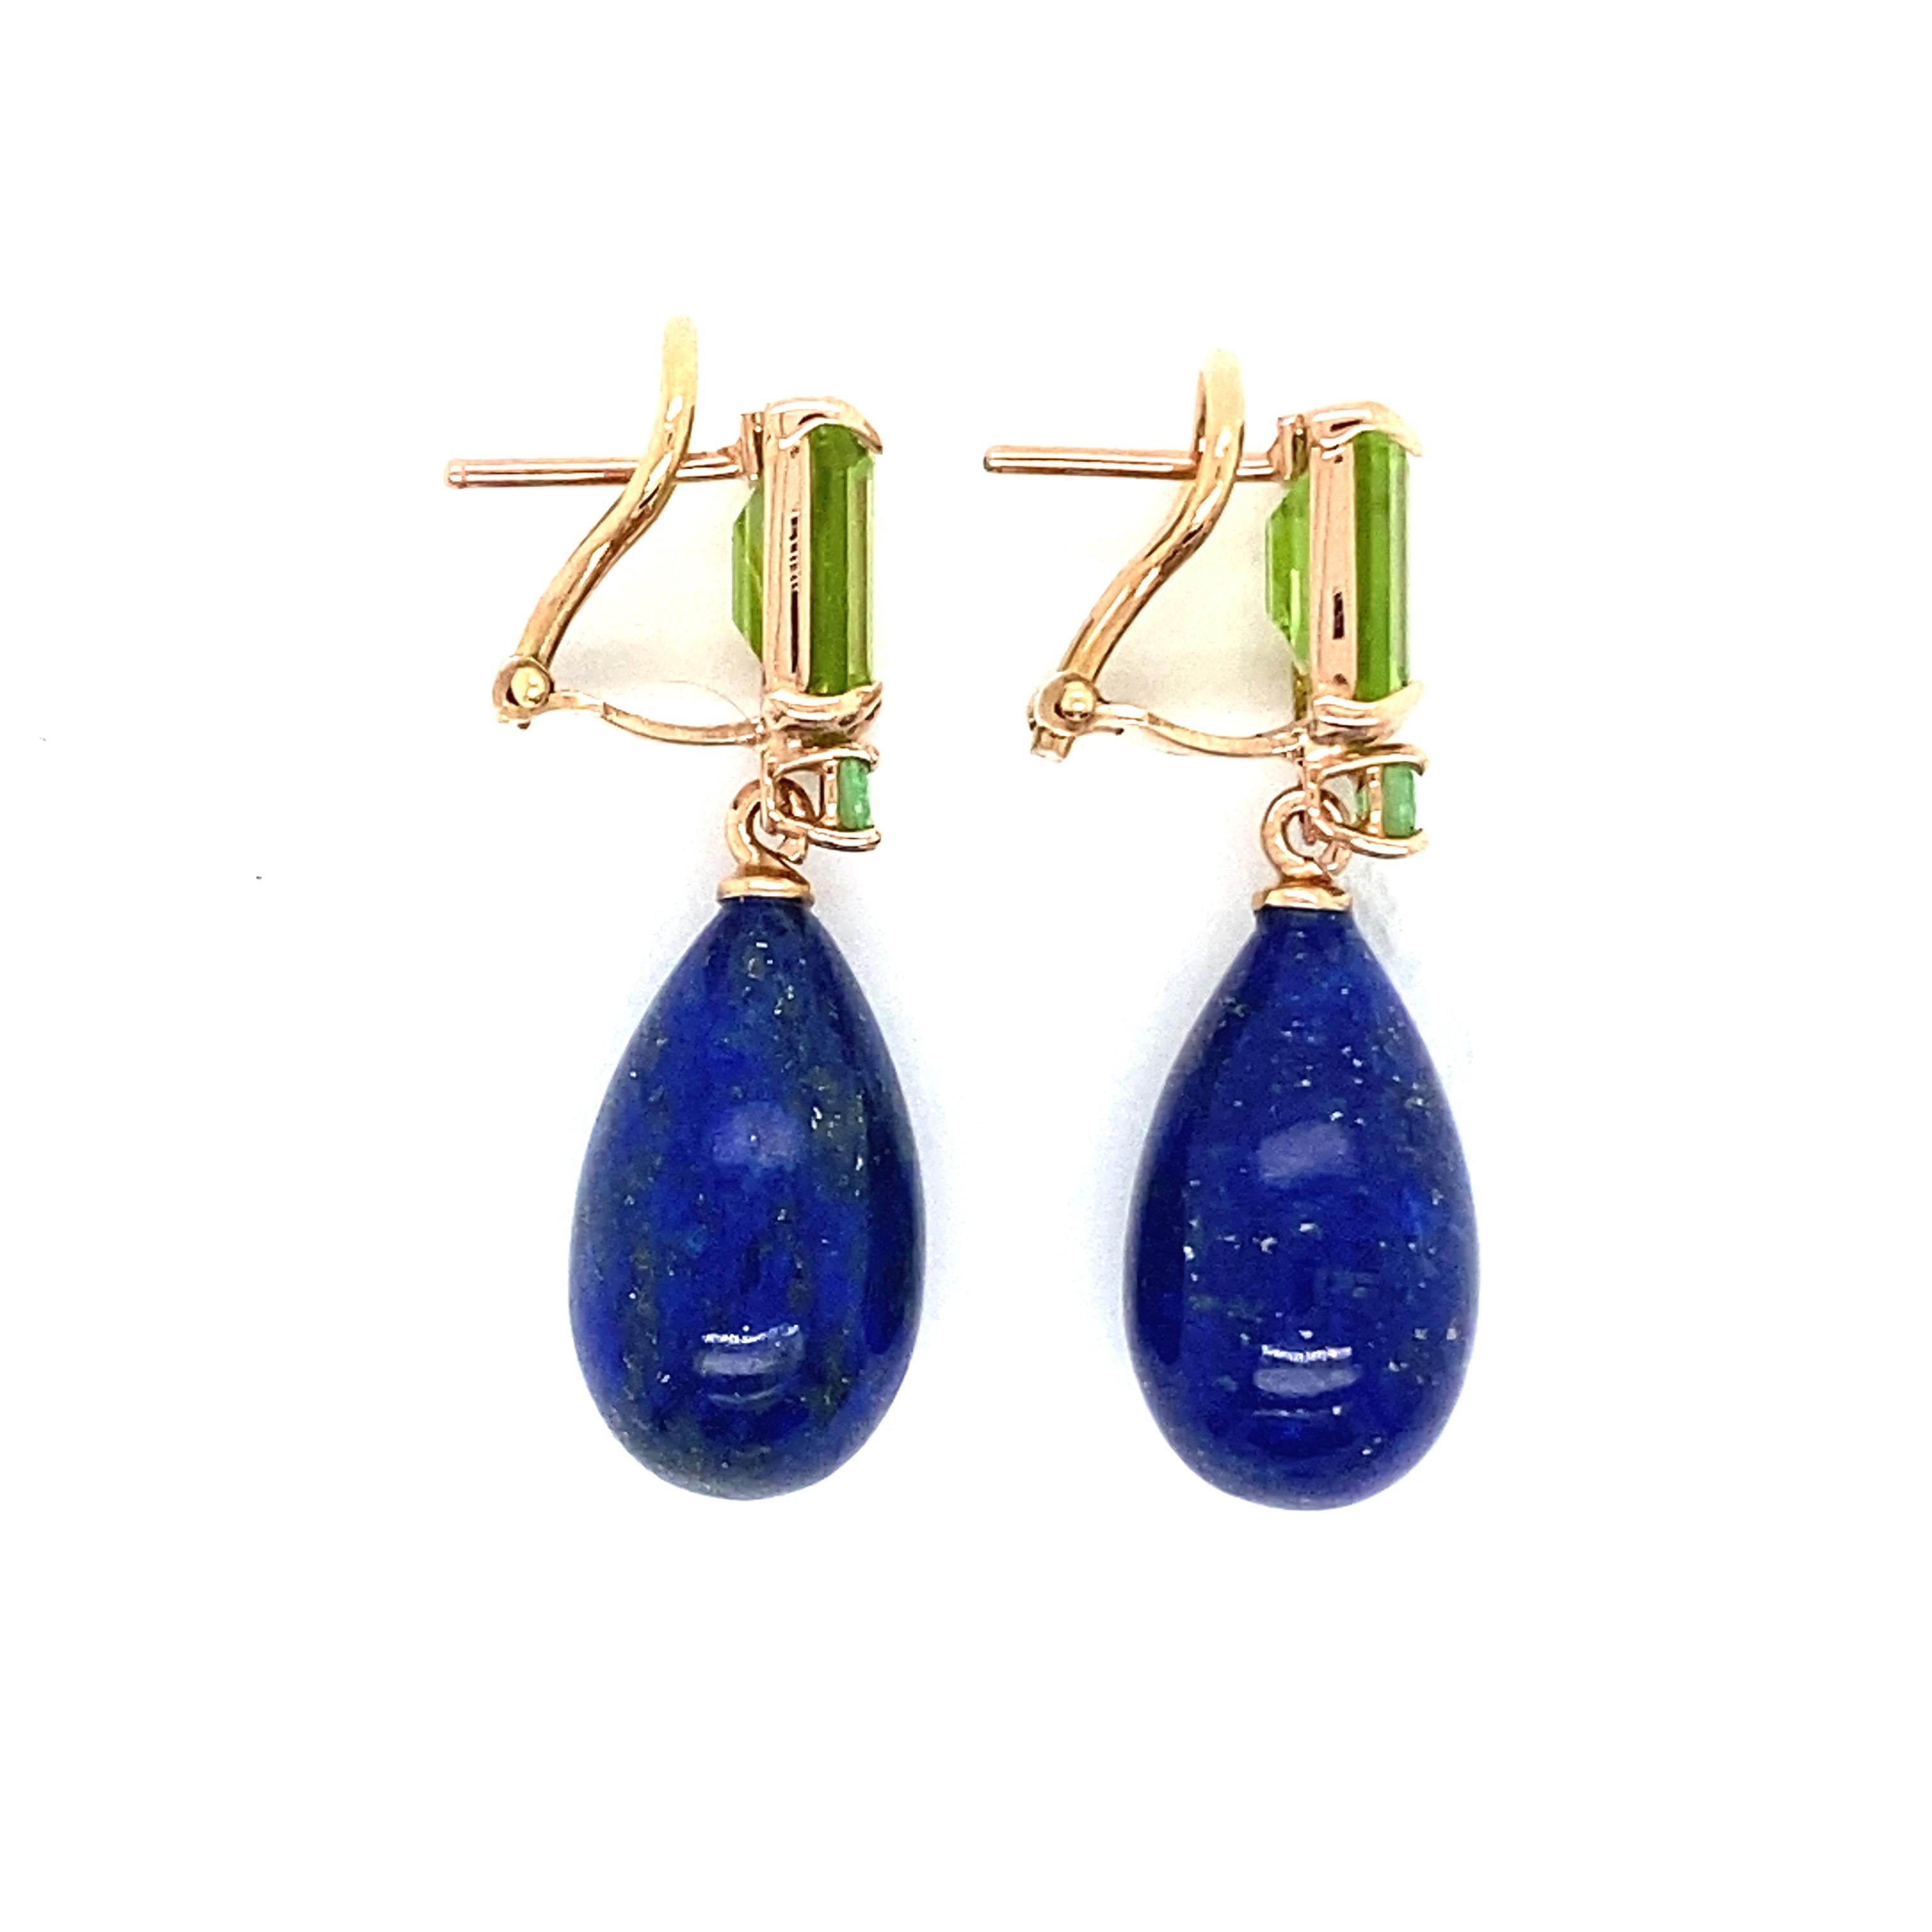 Mixed Cut Pink Gold Earrings with Peridots, Tsavorite and a Drop in Lapis Lazuli  For Sale